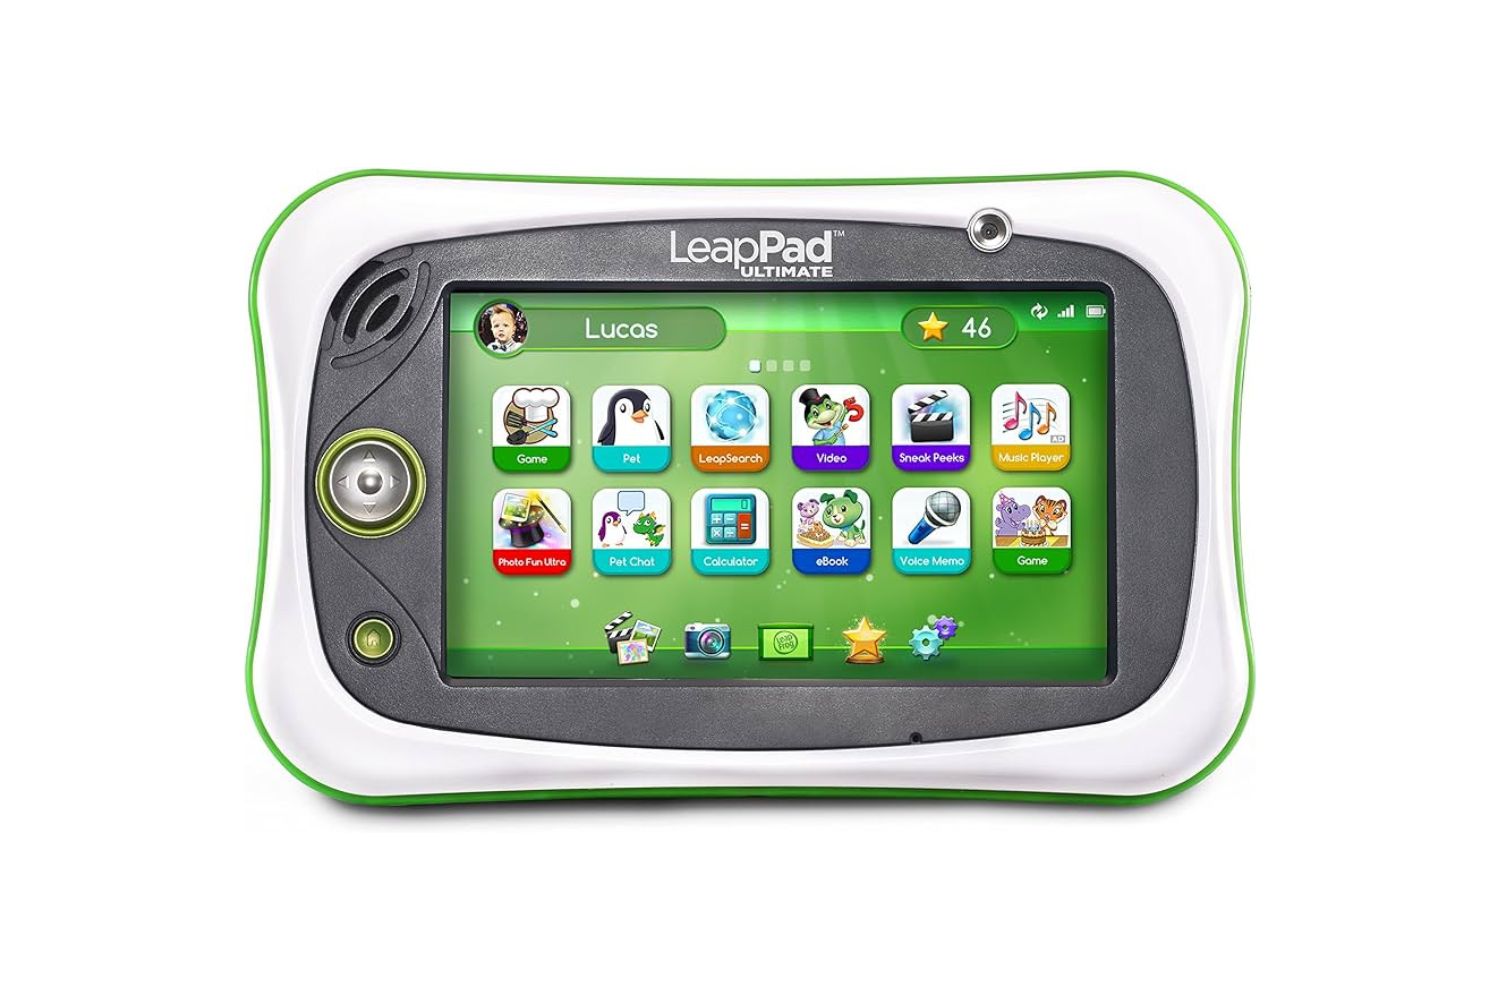 What Is The Latest Leapfrog Tablet